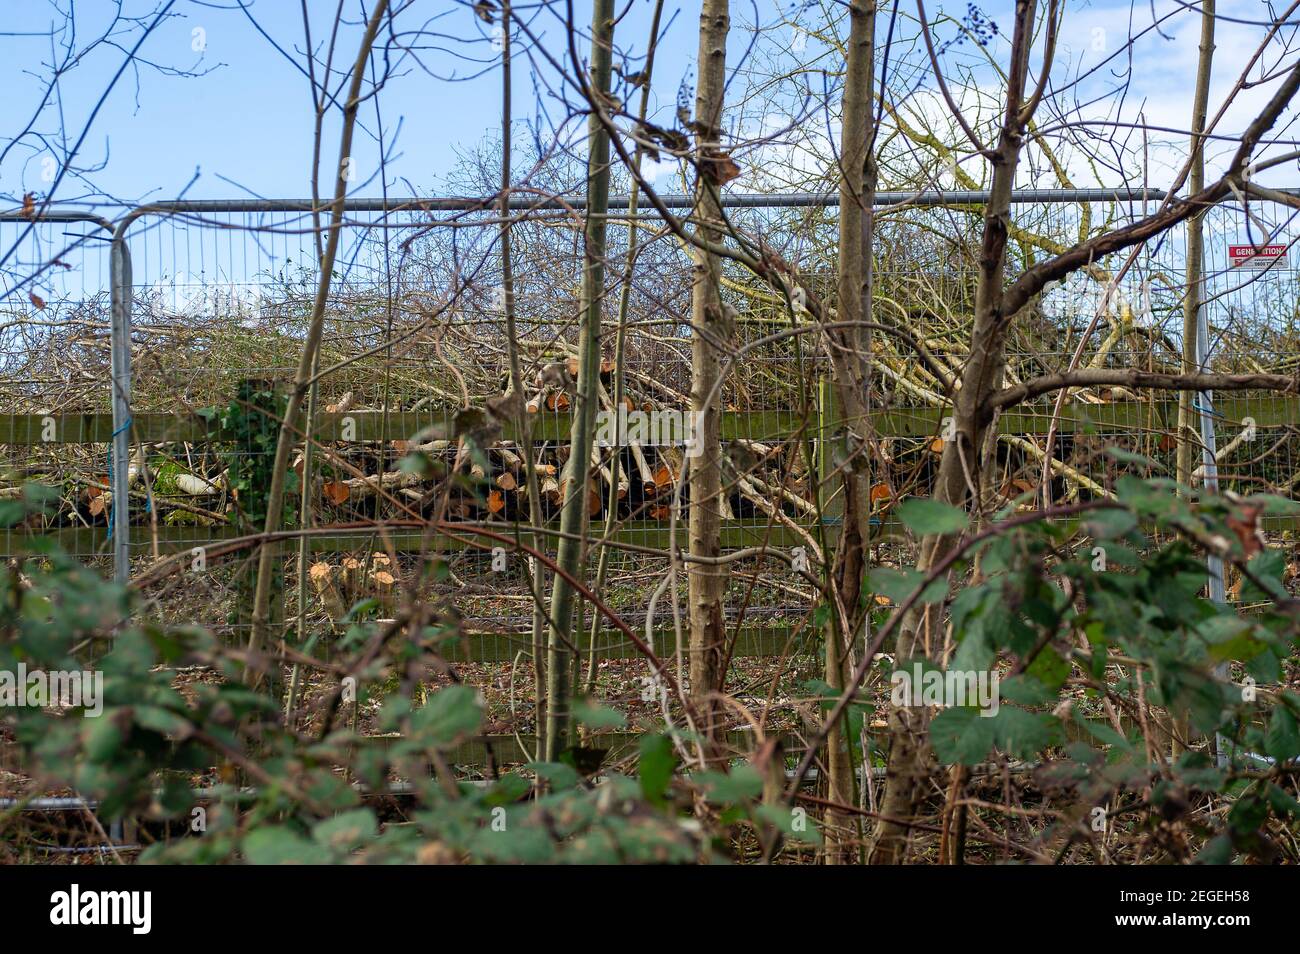 Aylesbury, Buckinghamshire, UK. 18th February, 2021. HS2 have felled an area of hazel coppice where dormice live much to the fury of the landowner and local residents. HS2 Ltd have been unable to provide a copy of a wildlife licence from Natural England allowing them to fell in this area. The High Speed Rail 2 from London to Birmingham puts 693 wildlife sites, 33 SSSIs and 108 ancient woodlands at risk. Credit: Maureen McLean/Alamy Stock Photo